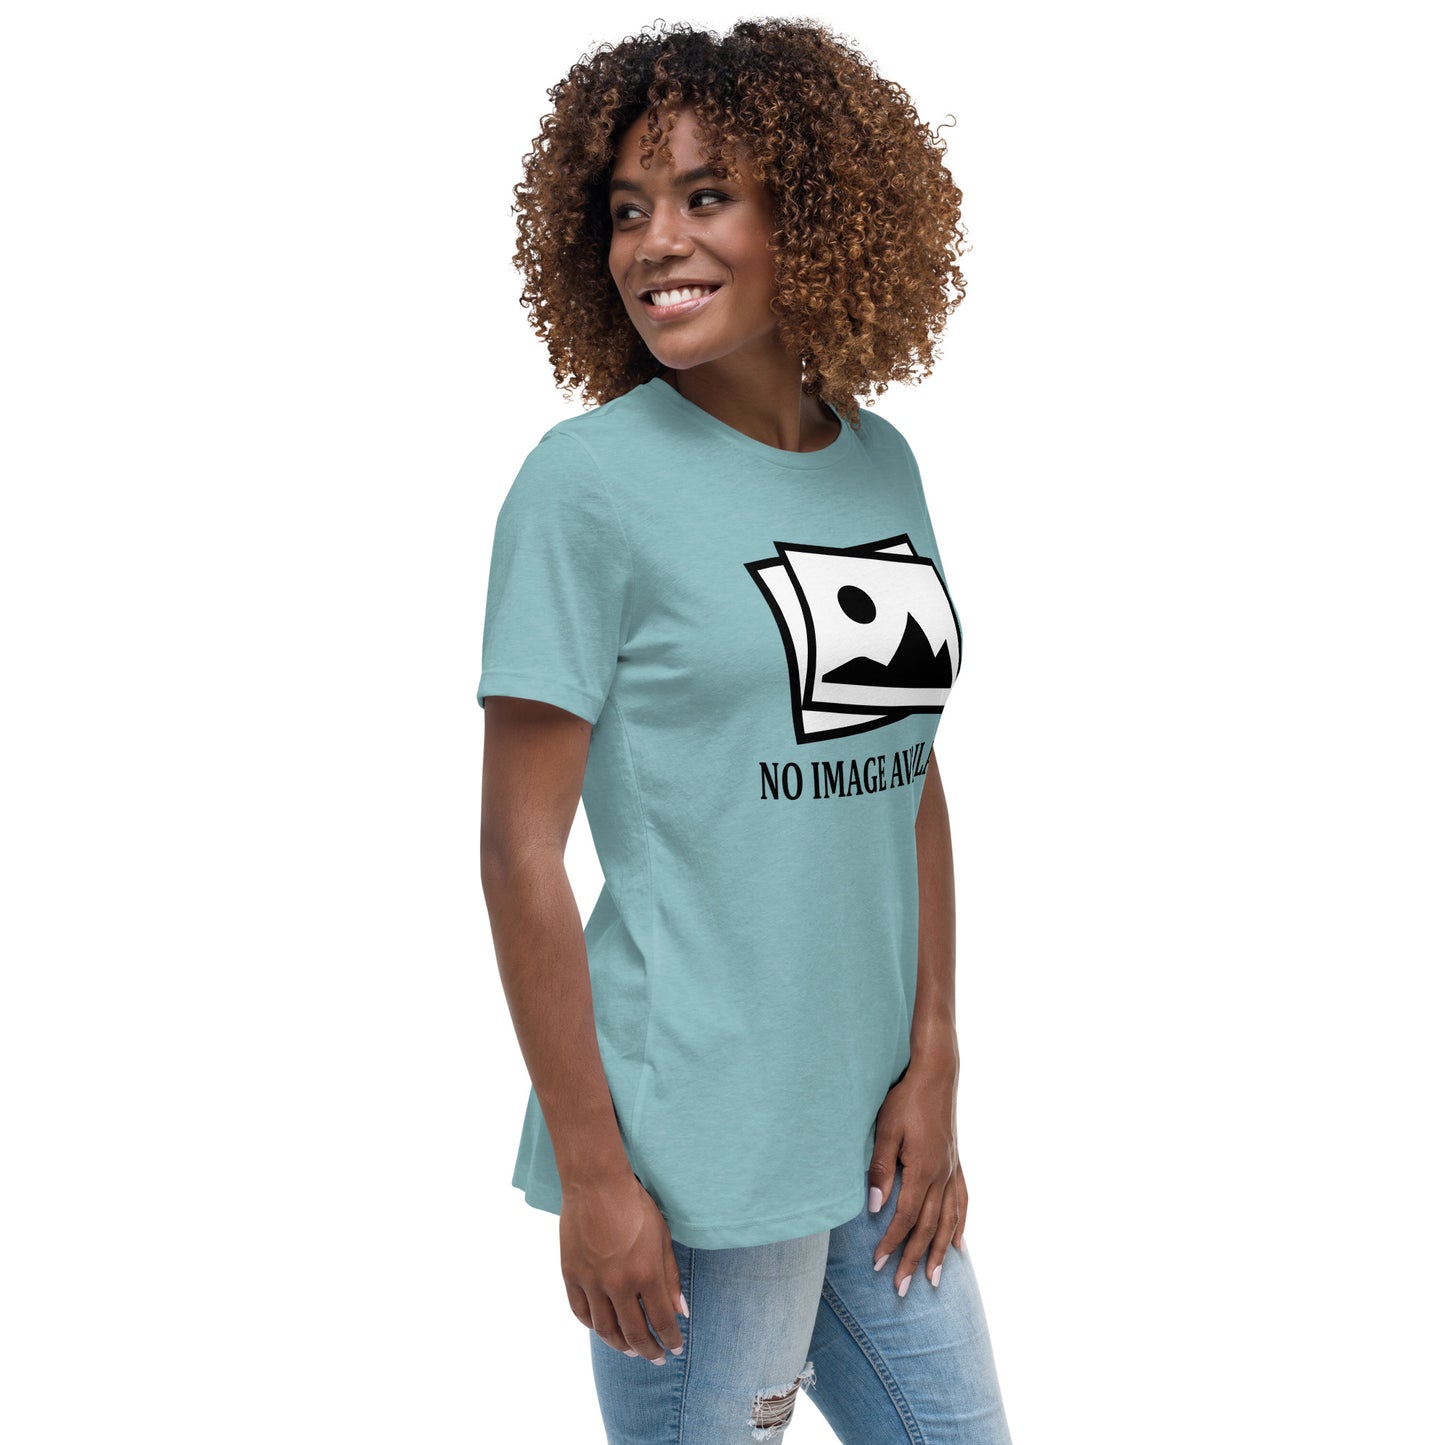 Women with blue lagoon t-shirt with image and text "no image available"